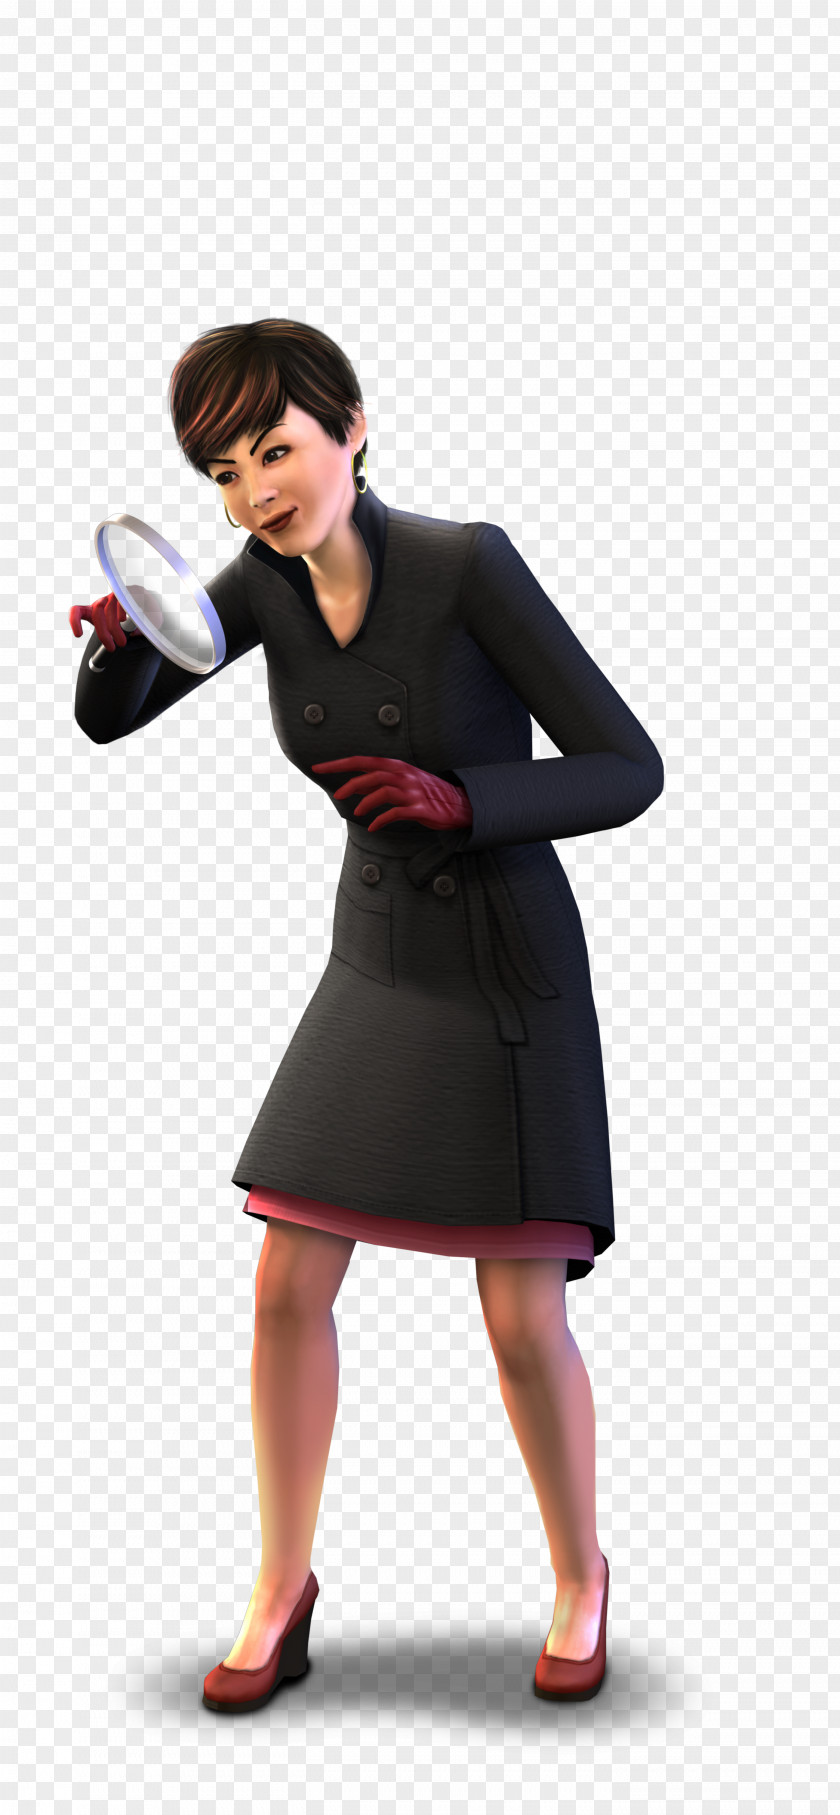 New Investigator The Sims 3: Ambitions 4 Expansion Pack Video Game PNG